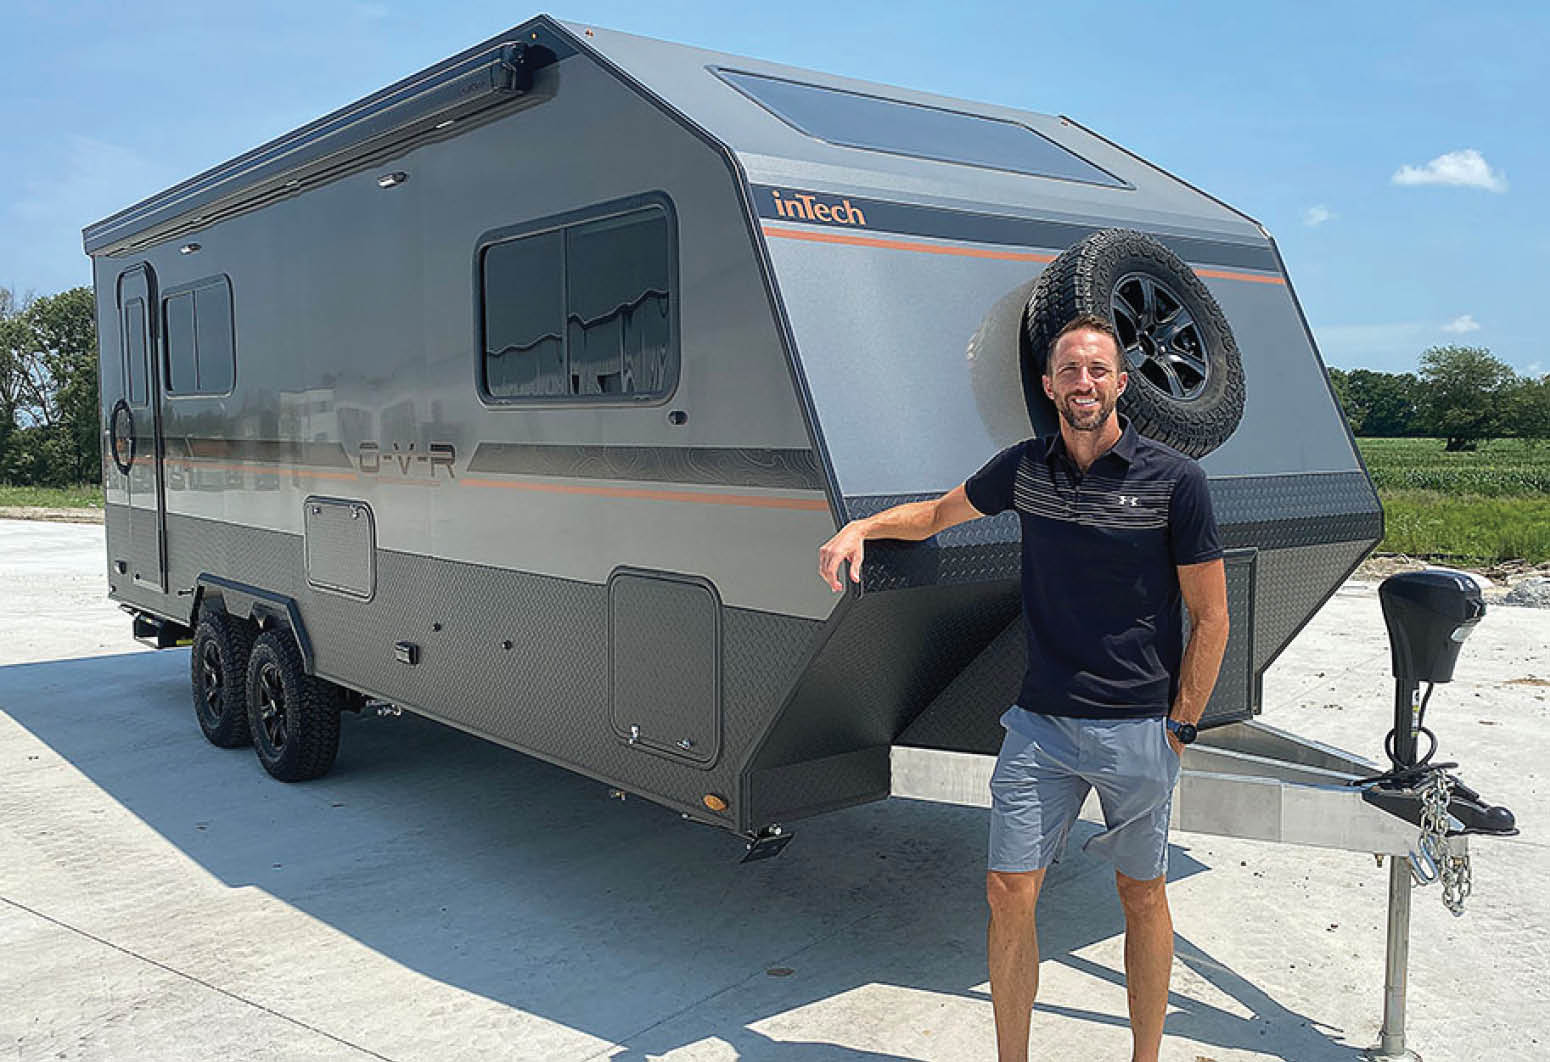 inTech sales manager Keith Fishburn with inTech’s rugged new O-V-R travel trailer.